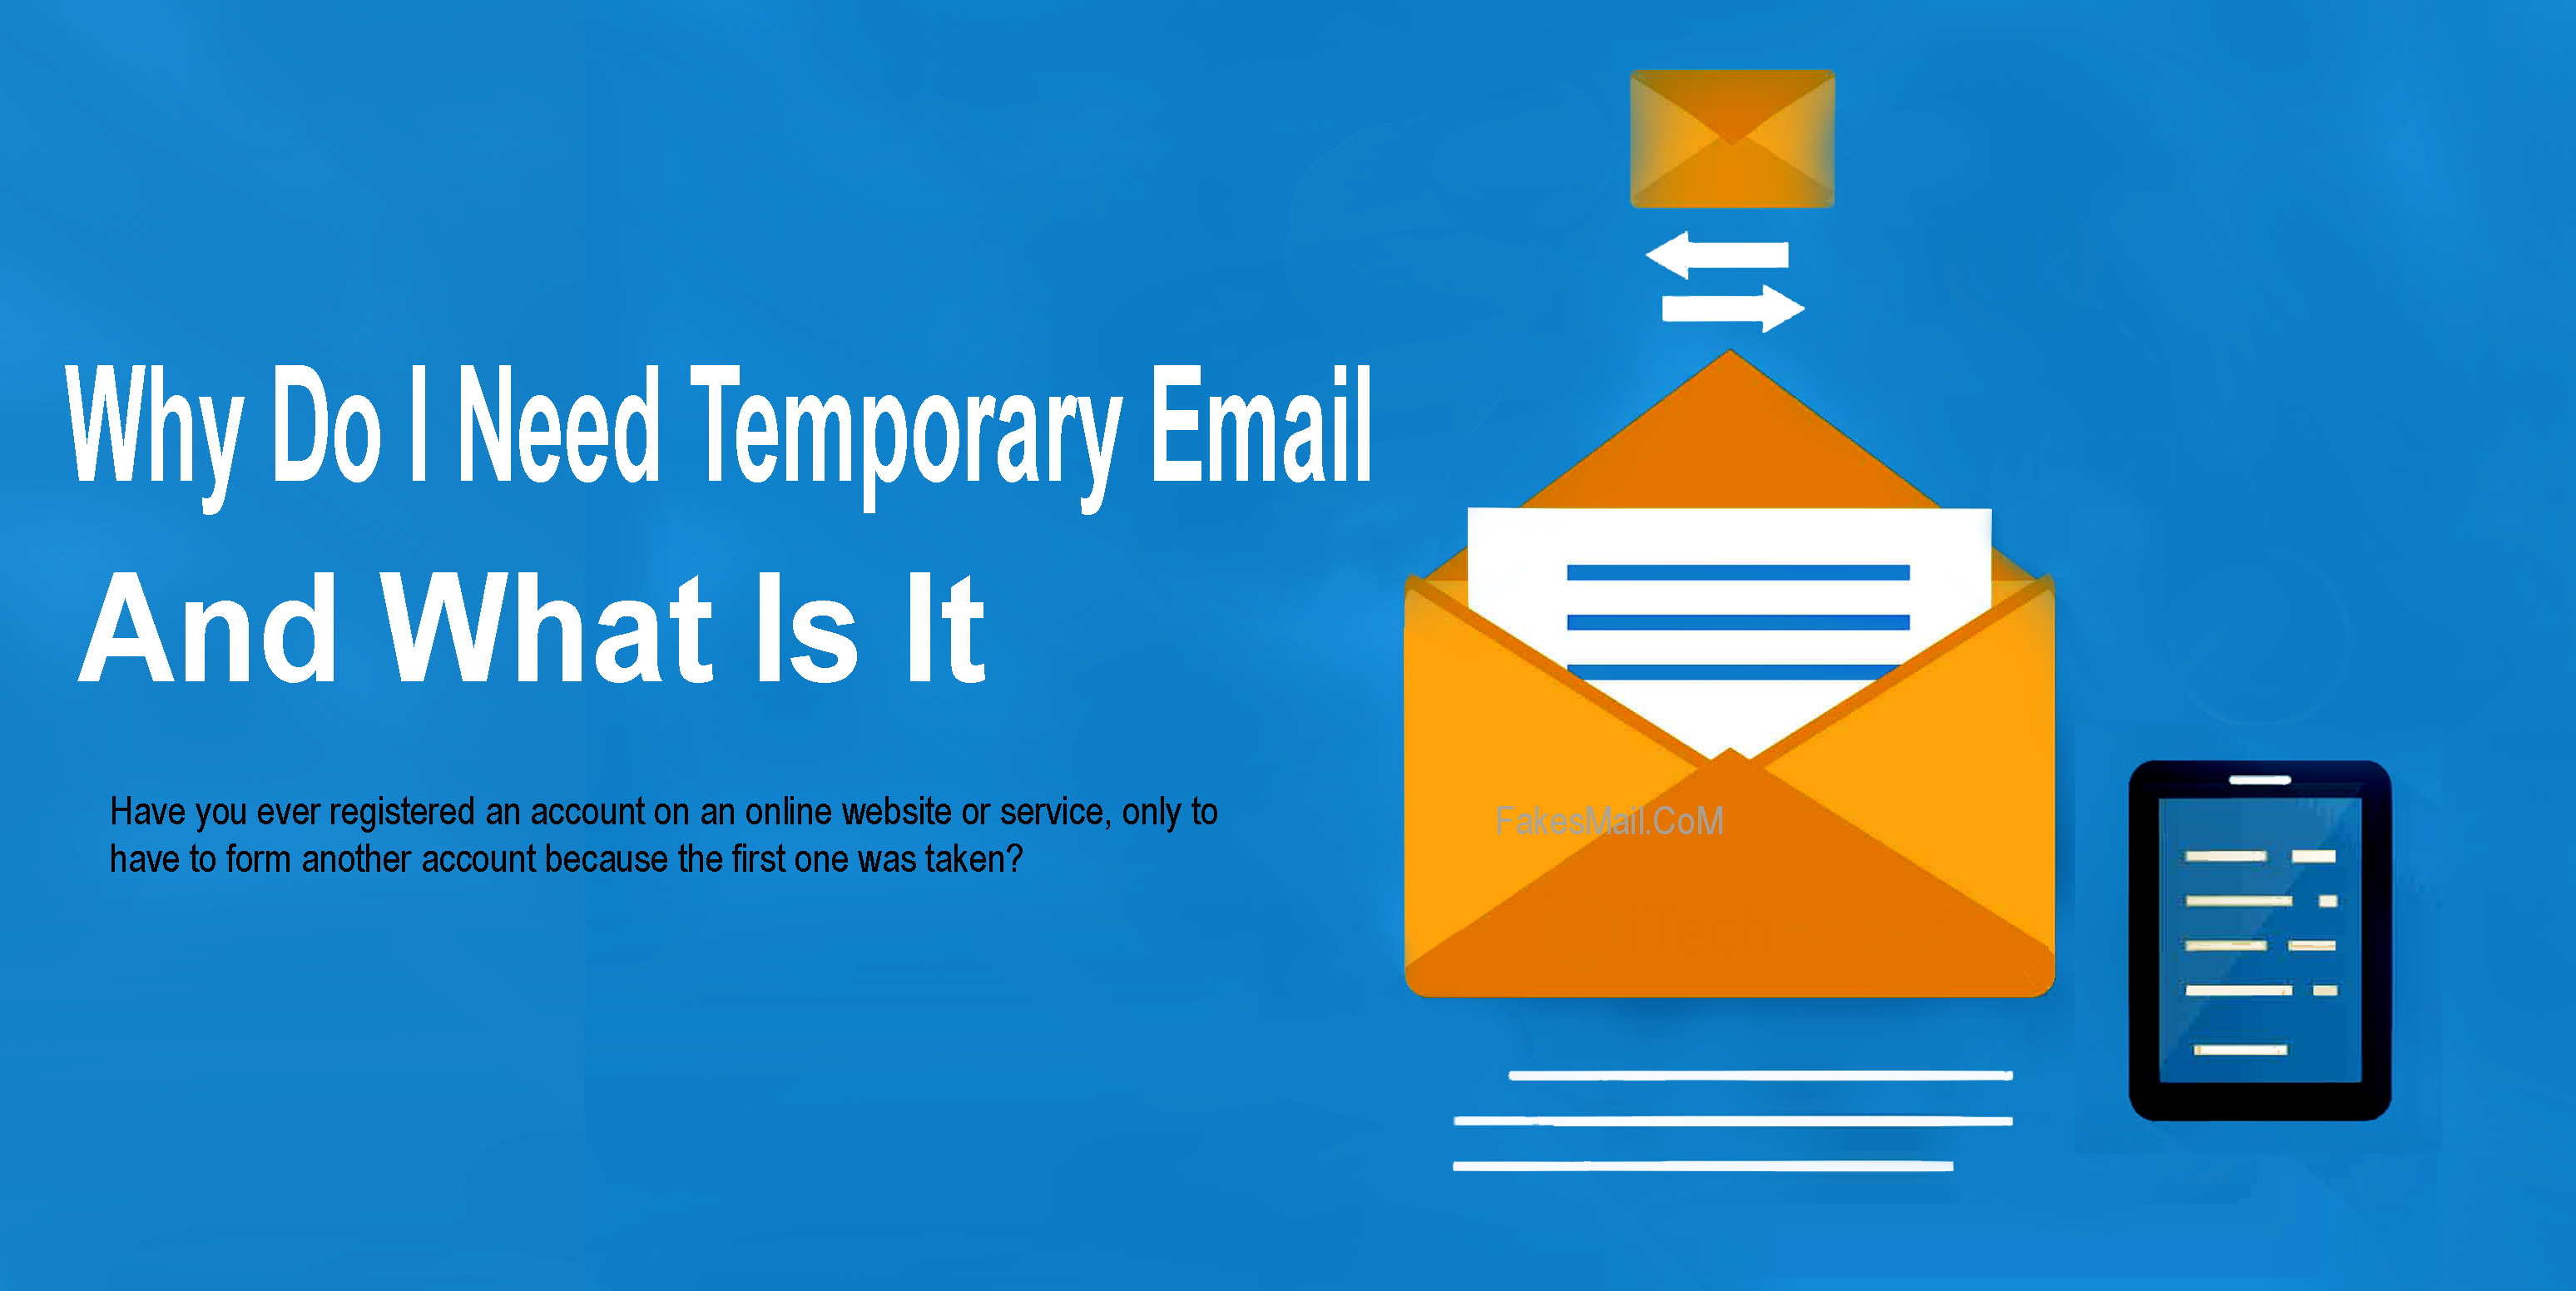 Why Do I Need Temporary Email And What Is It?